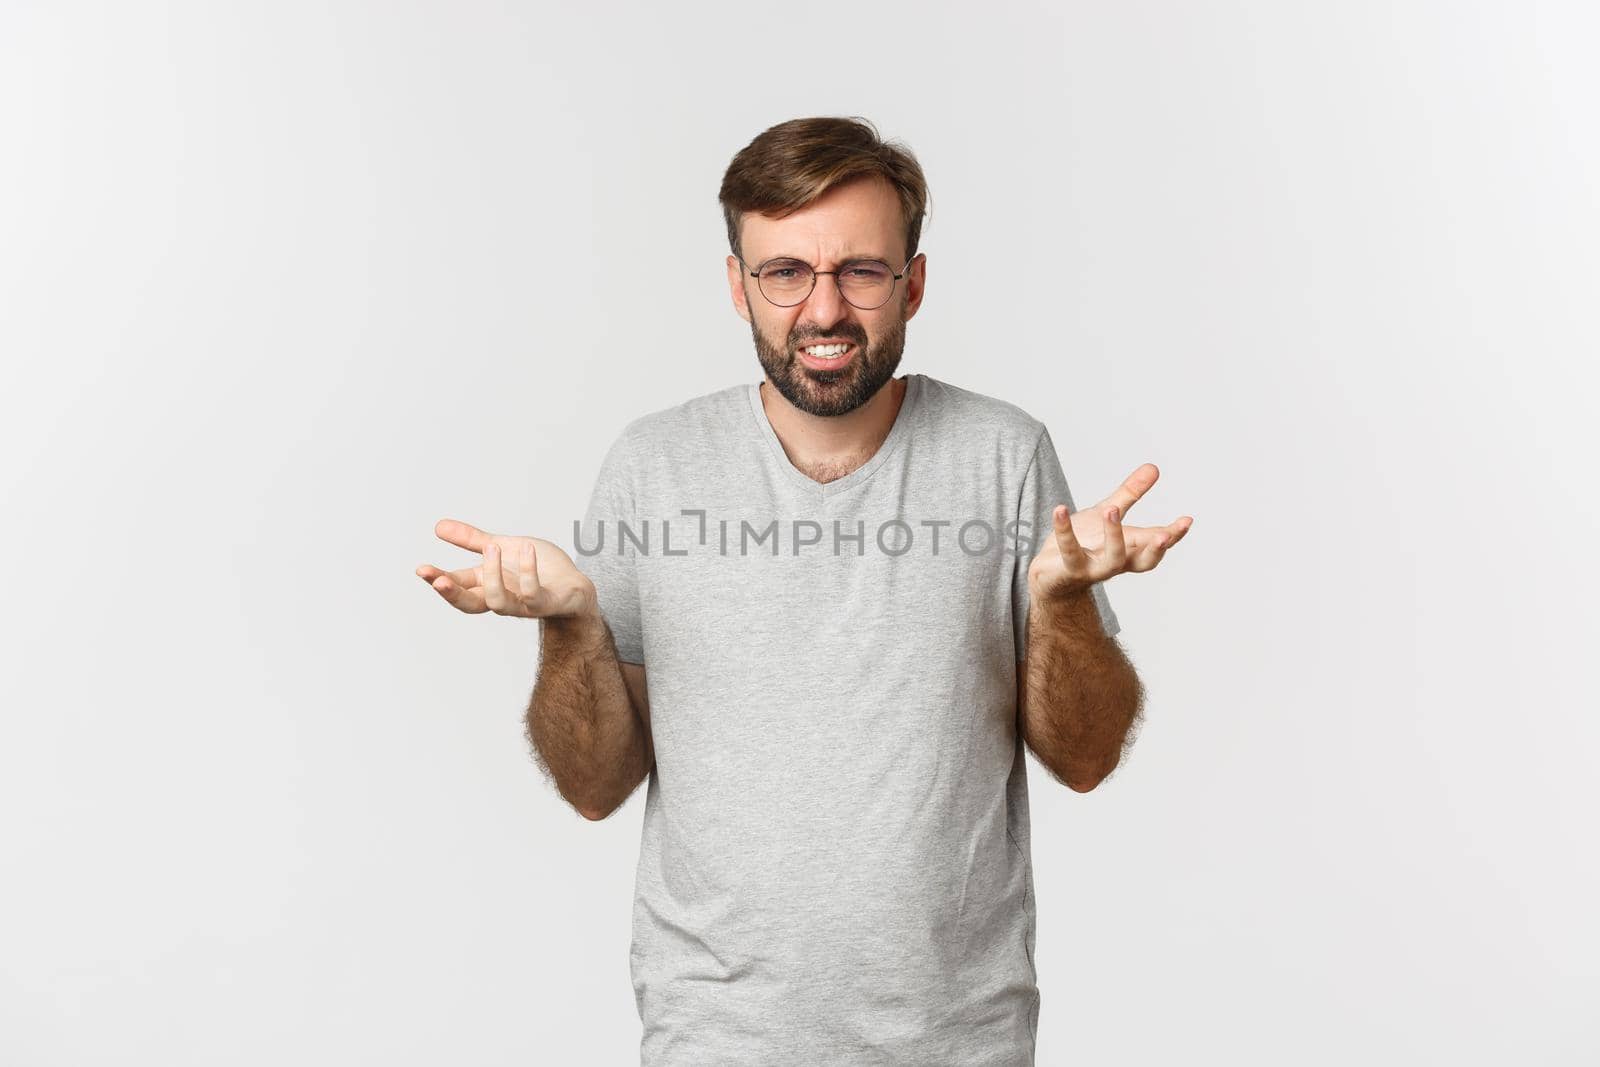 Image of frustrated young man in glasses and gray t-shirt, complaining, raising hands and looking pissed-off, standing over white background.